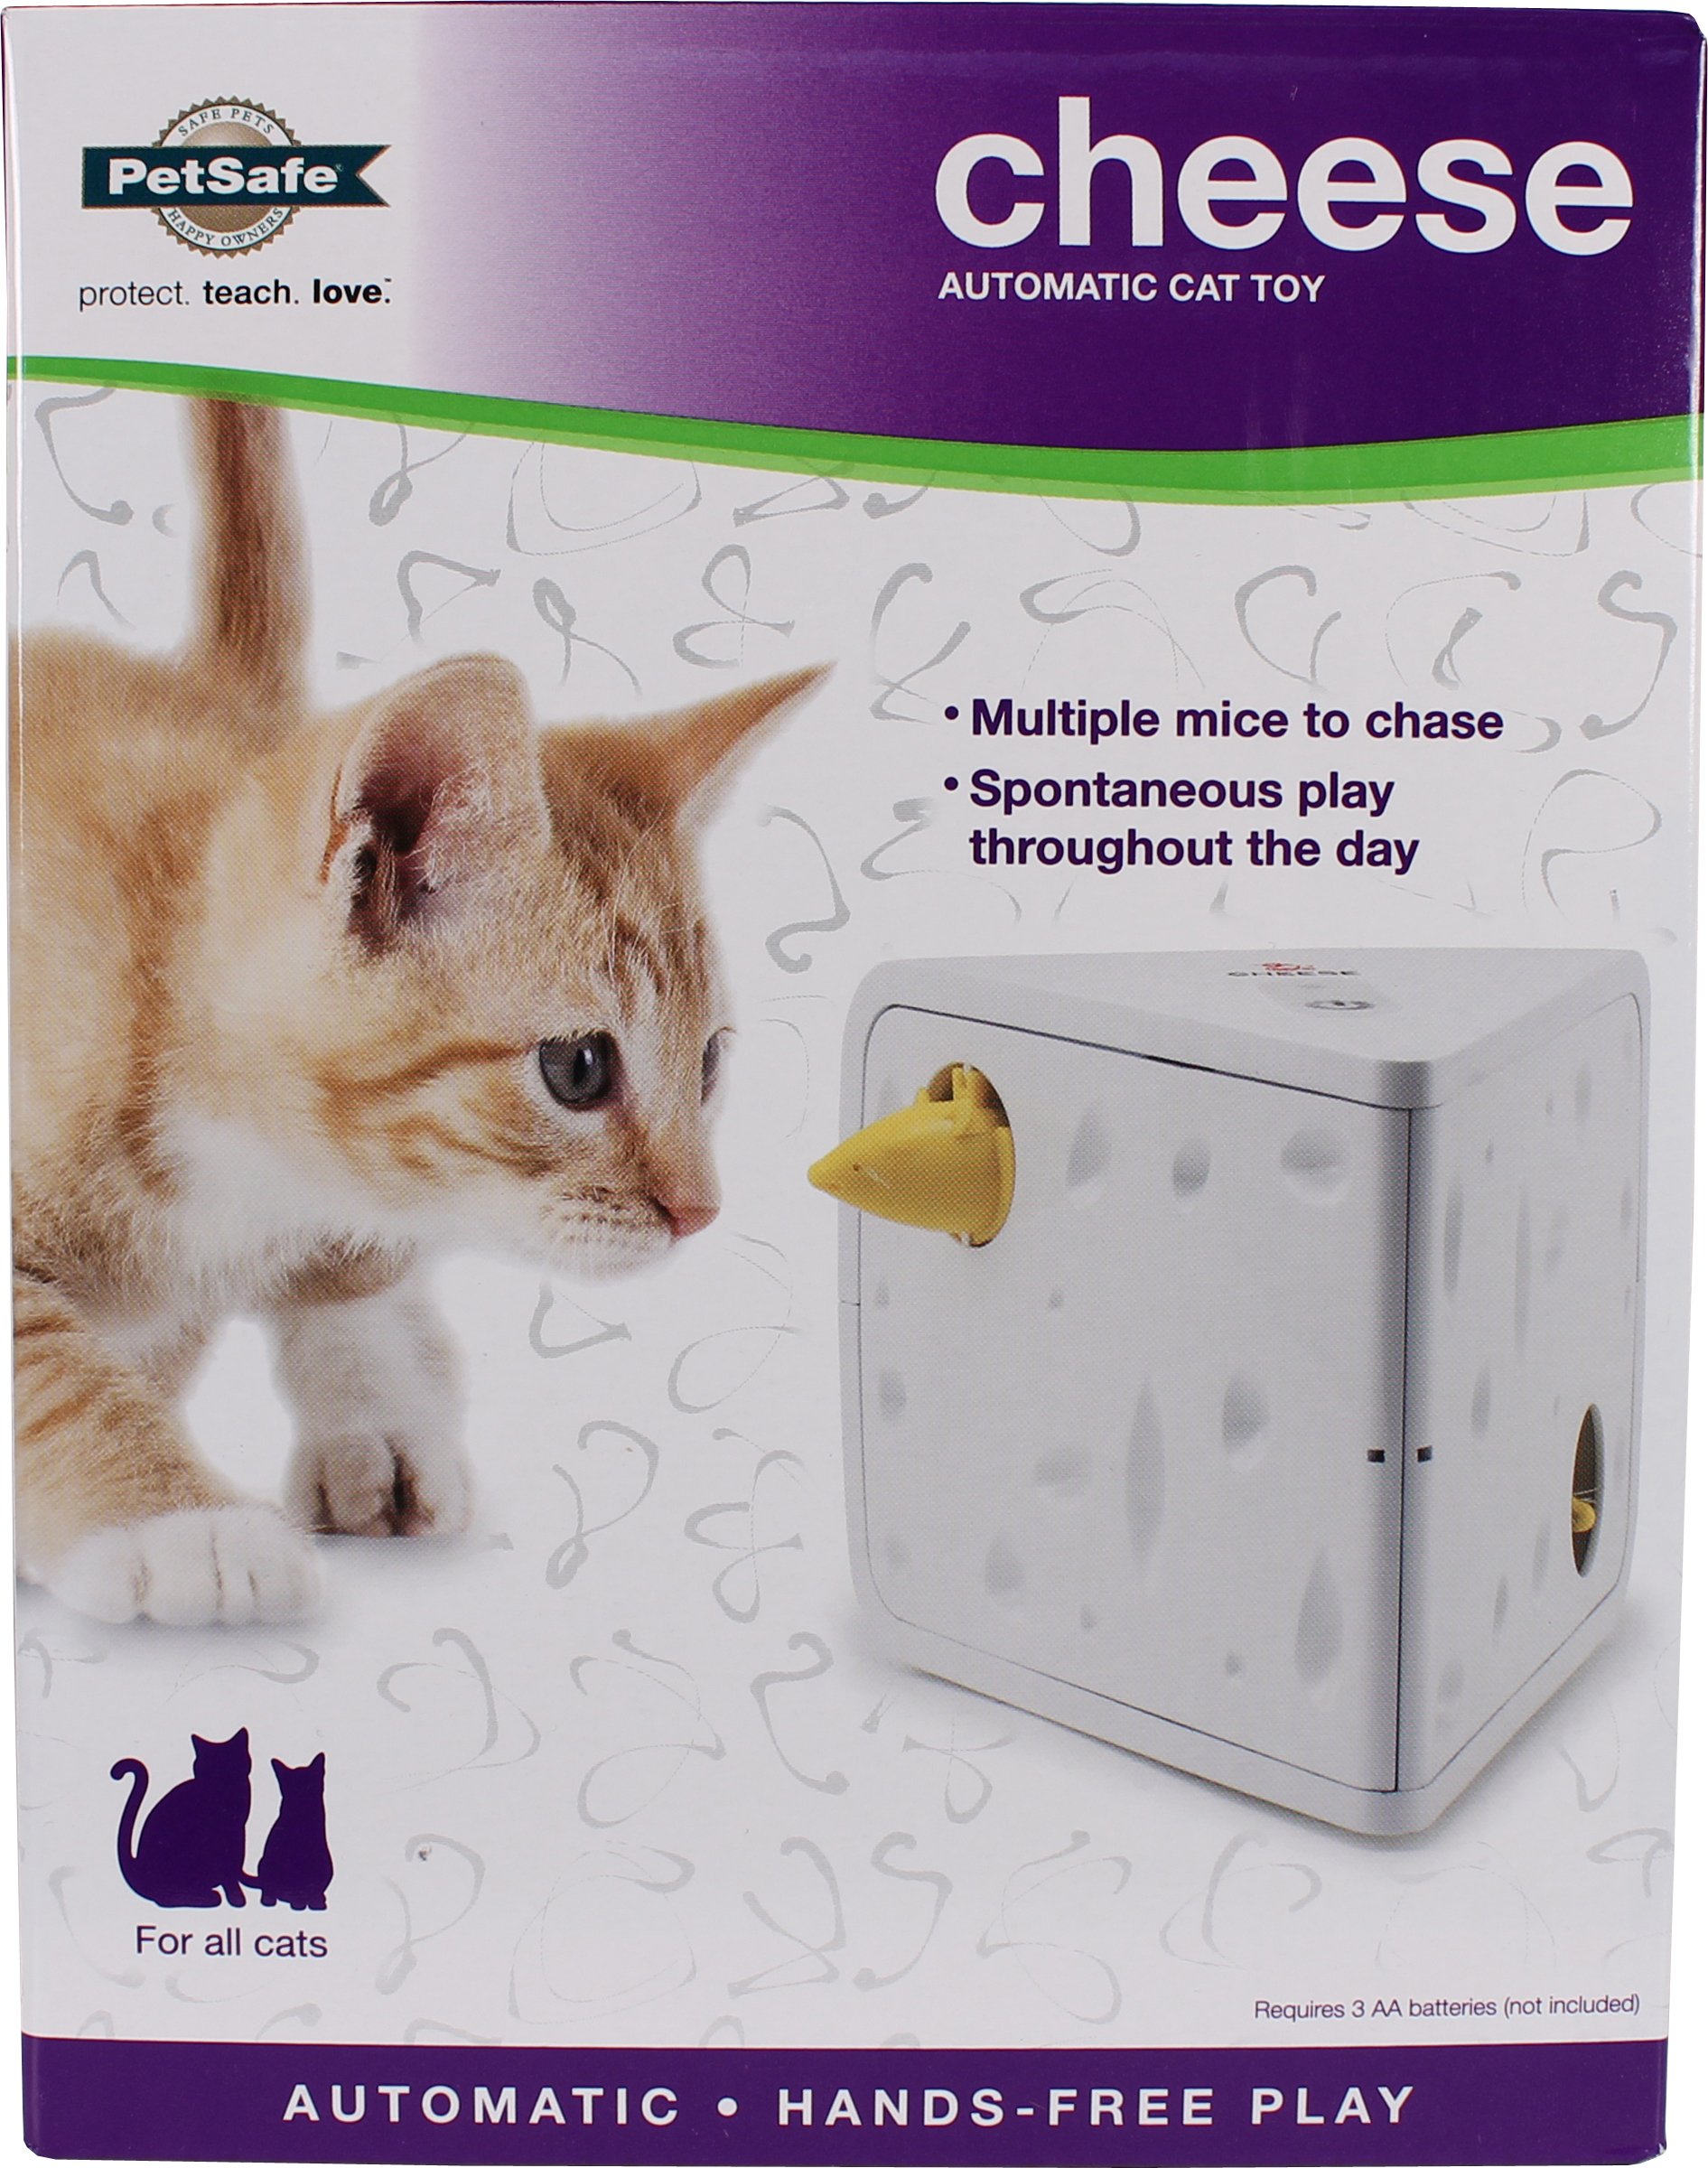 CHEESE AUTOMATIC CAT TOY